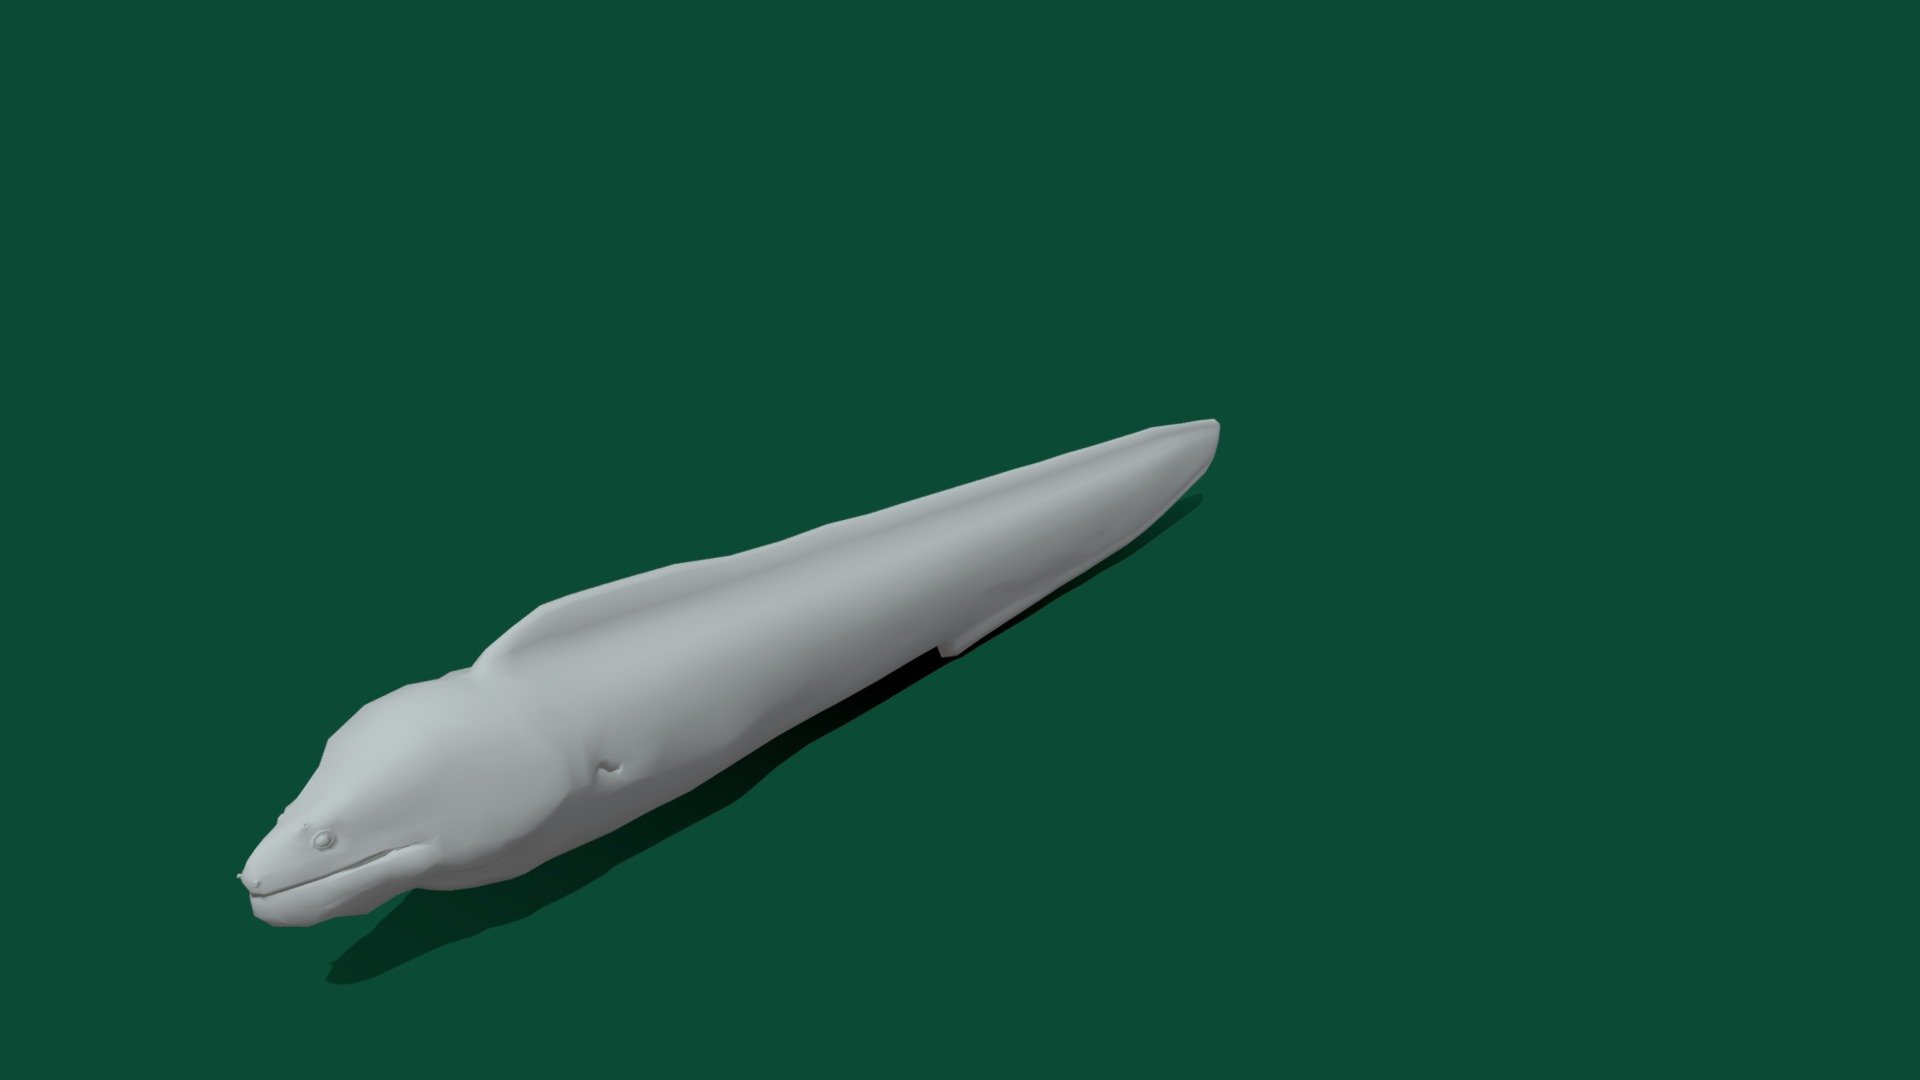 EEl_Low_poly_Game_Ready
Eels are ray-finned fish belonging to the order Anguilliformes, which consists of eight suborders, 19 families, 111 genera, and about 800 species. Eels undergo considerable development from the early larval stage to the eventual adult stage, and most are predators - EEL_VR_Game_Ready_V2 - 3D model by Nyilonelycompany 3d model